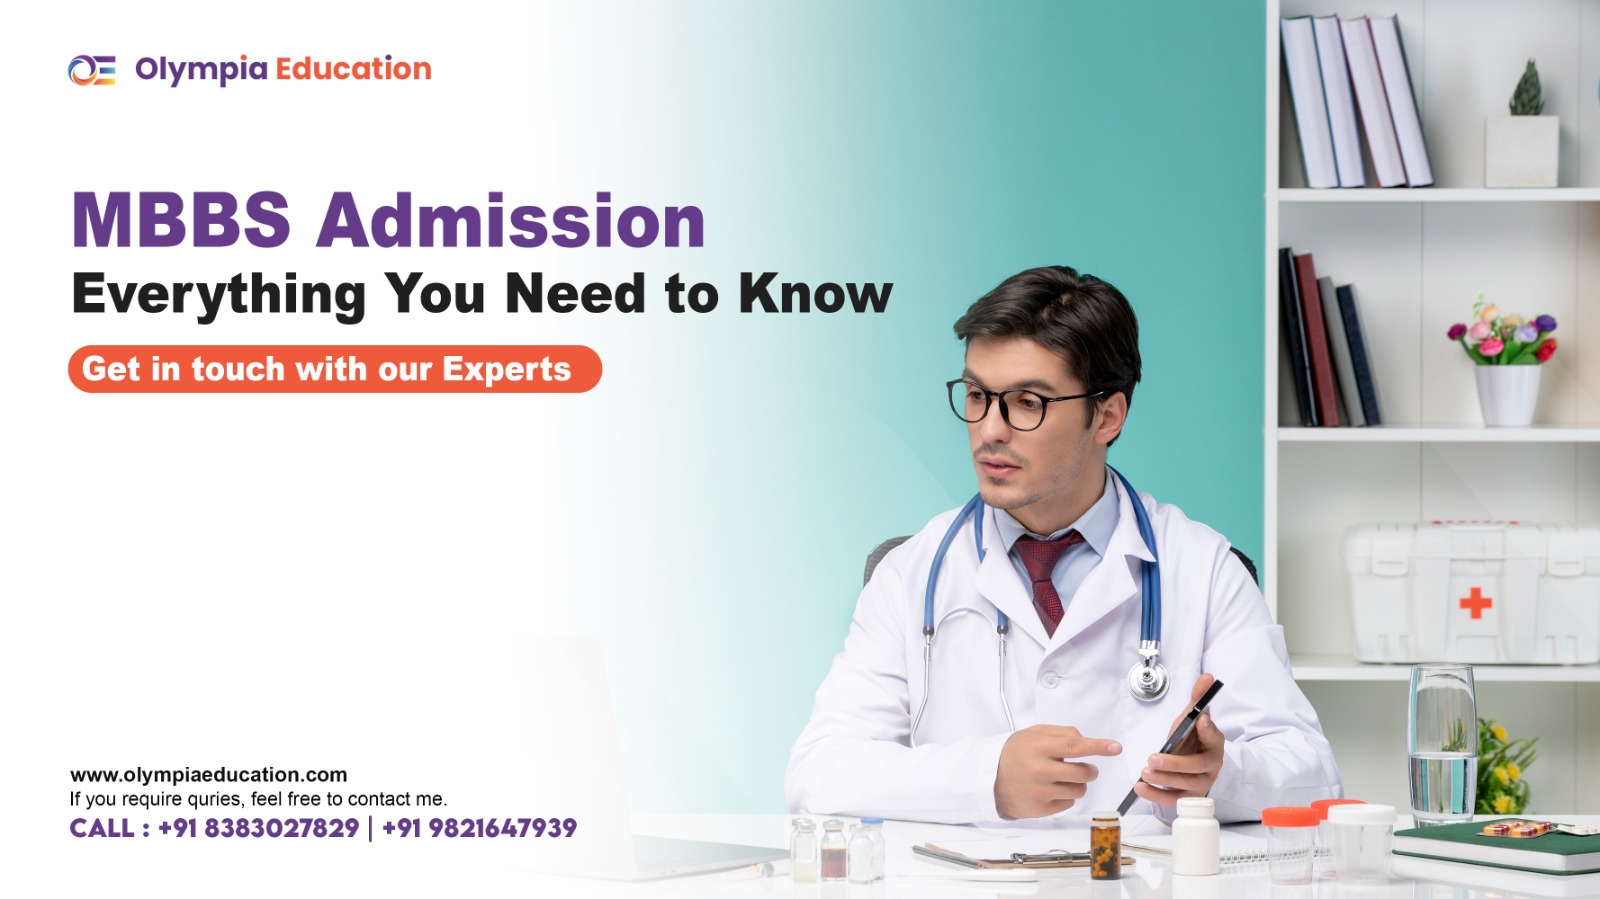 olympia-education-mbbs-admission